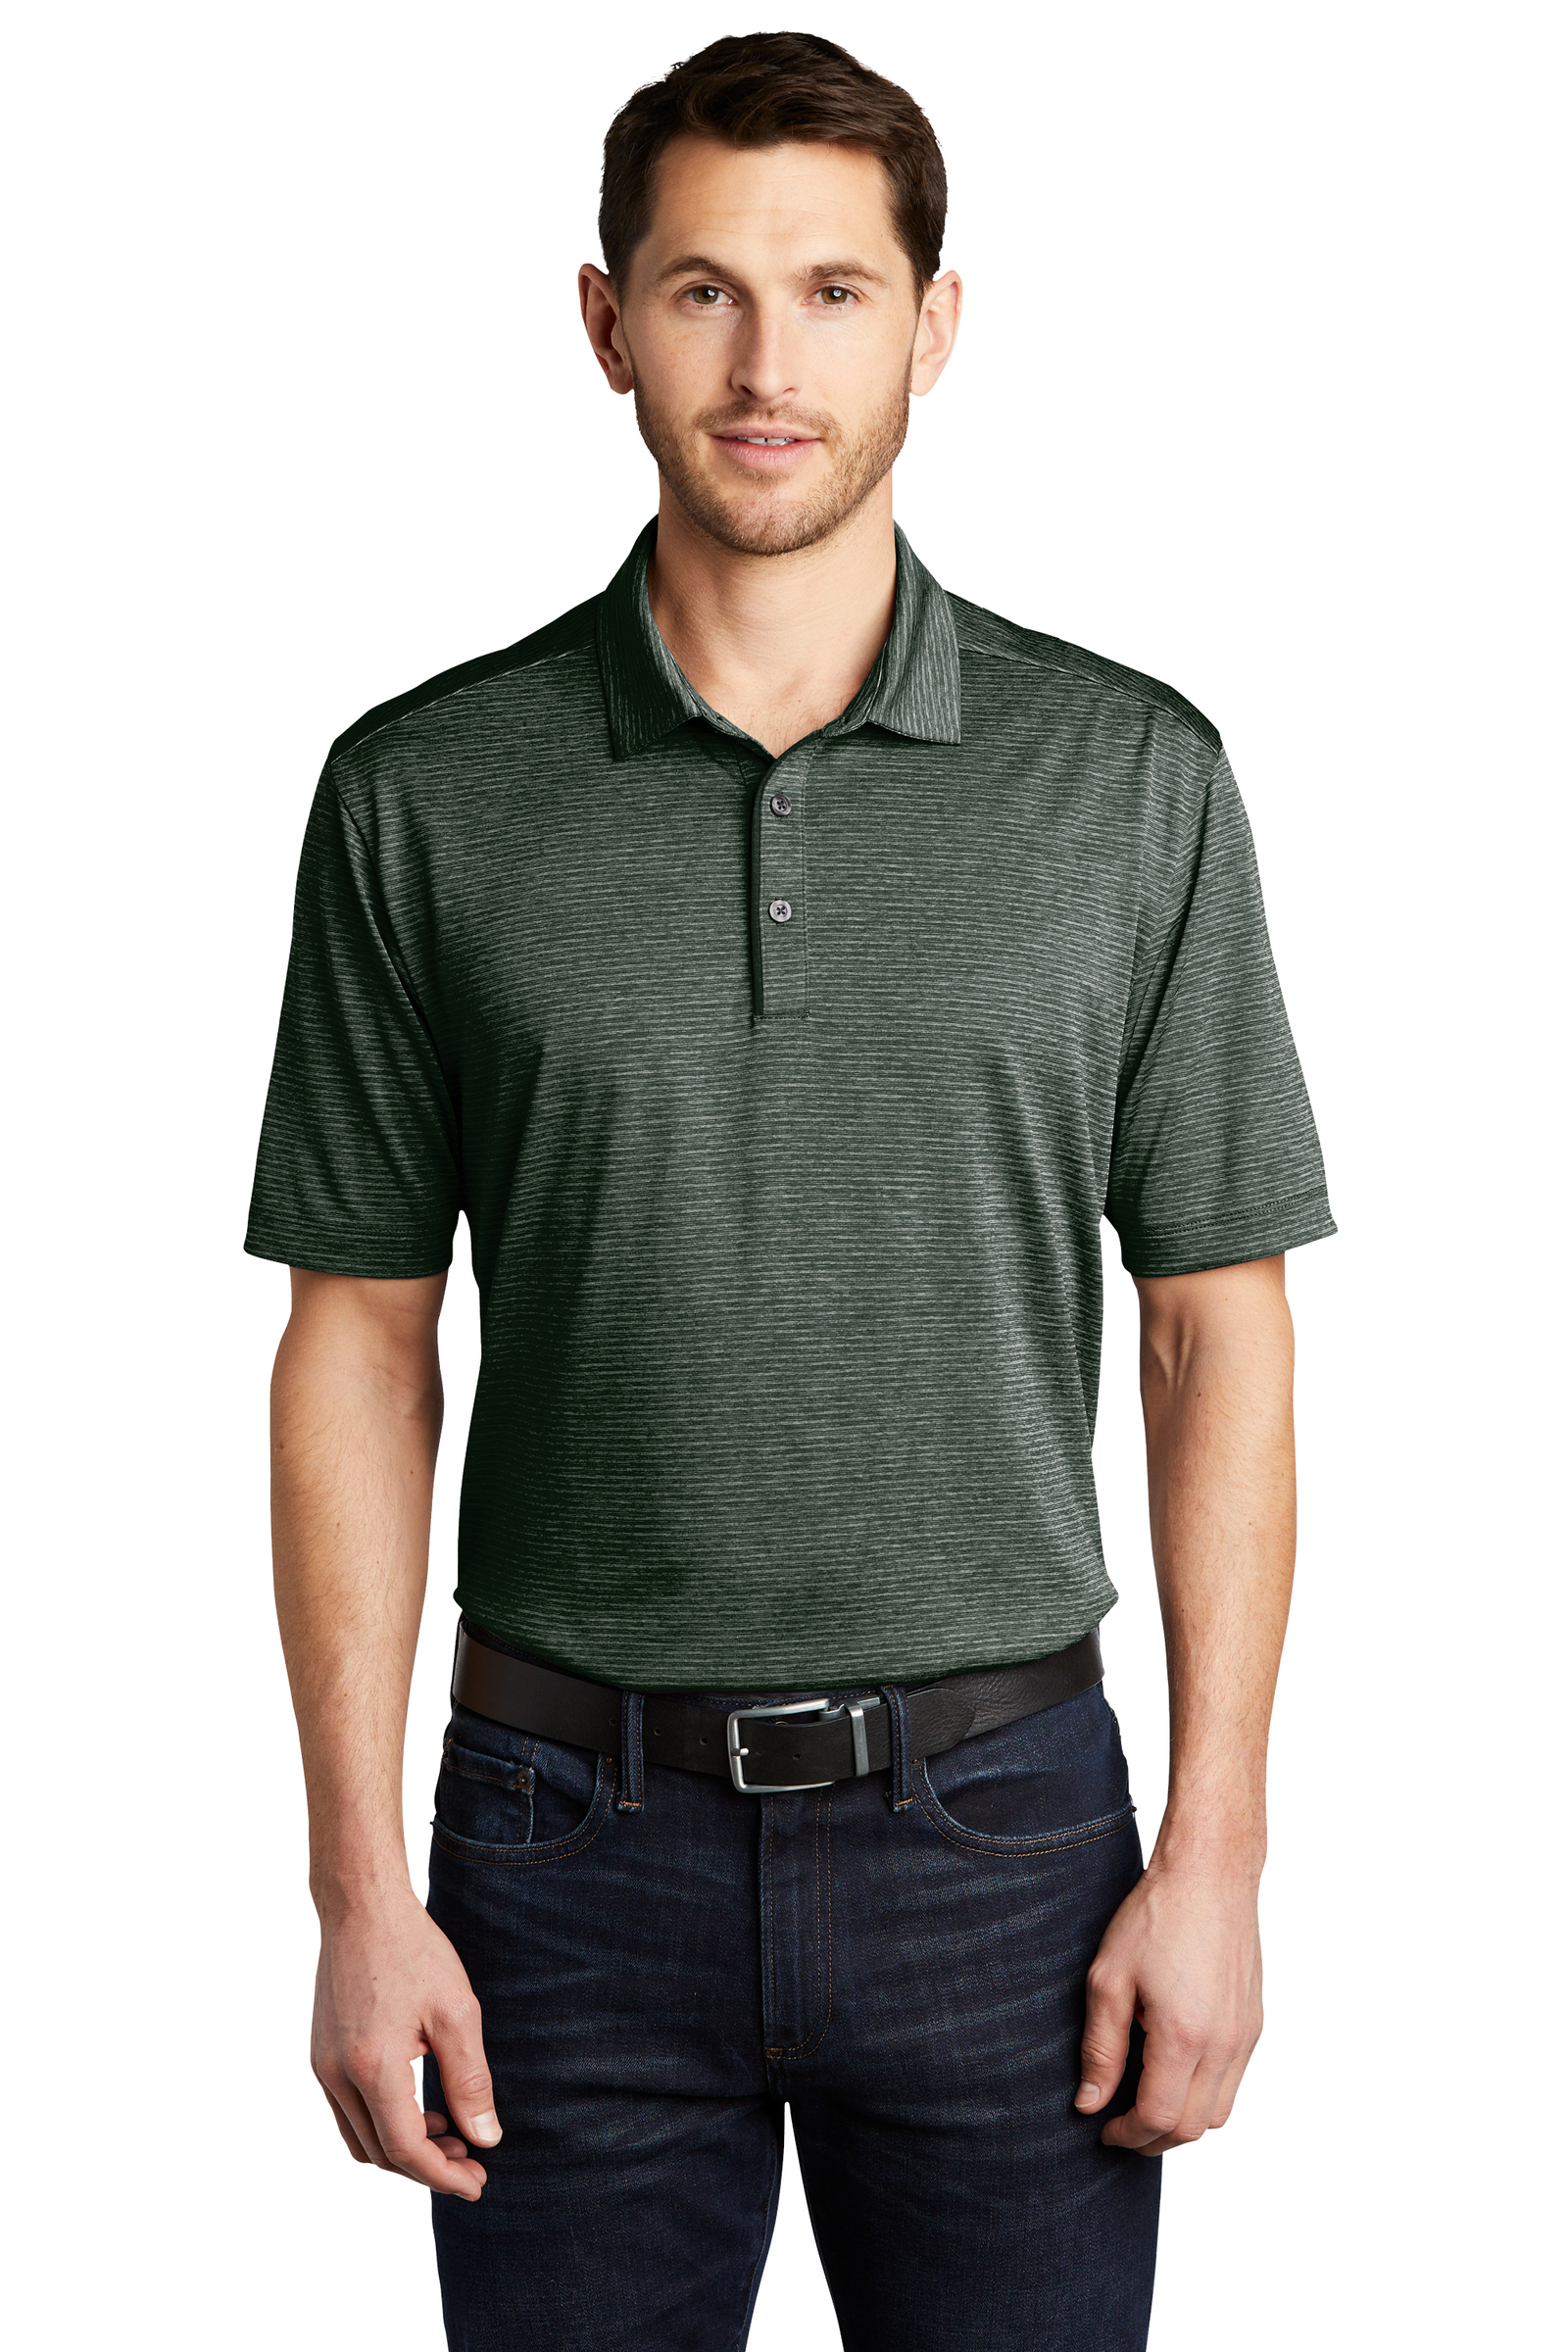 Port Authority Embroidered Men's Shadow Stripe Polo